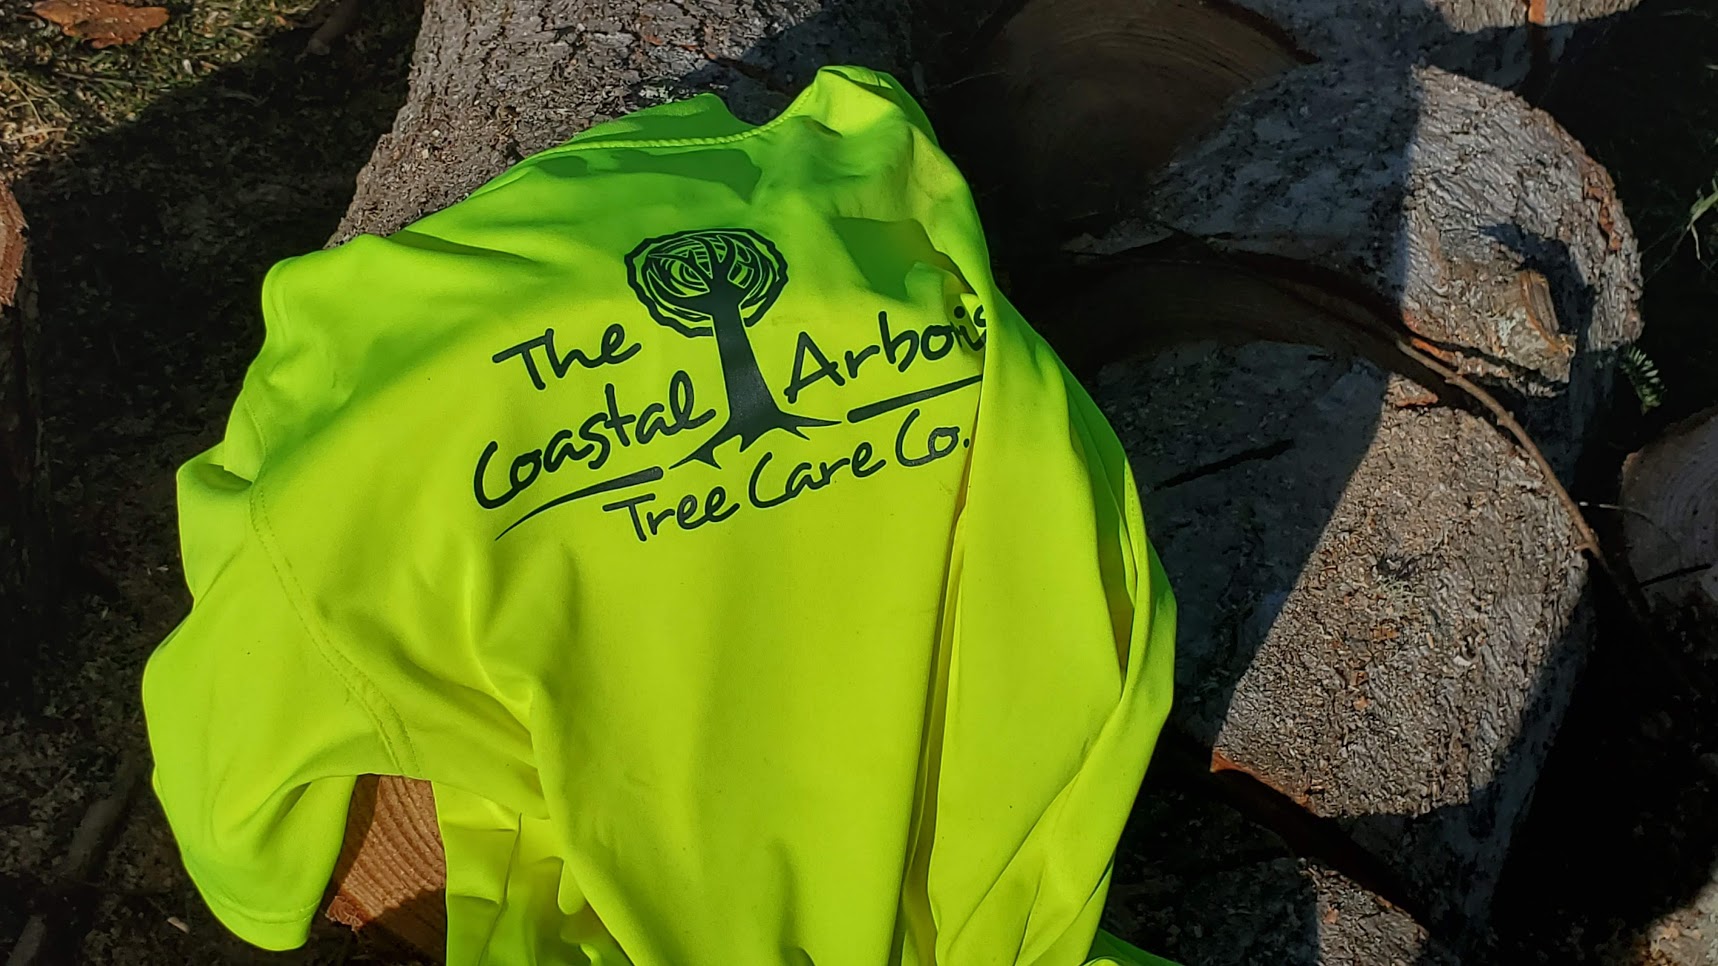 The Coastal Arborist t-shirt laying atop a wood pile in Campbell River